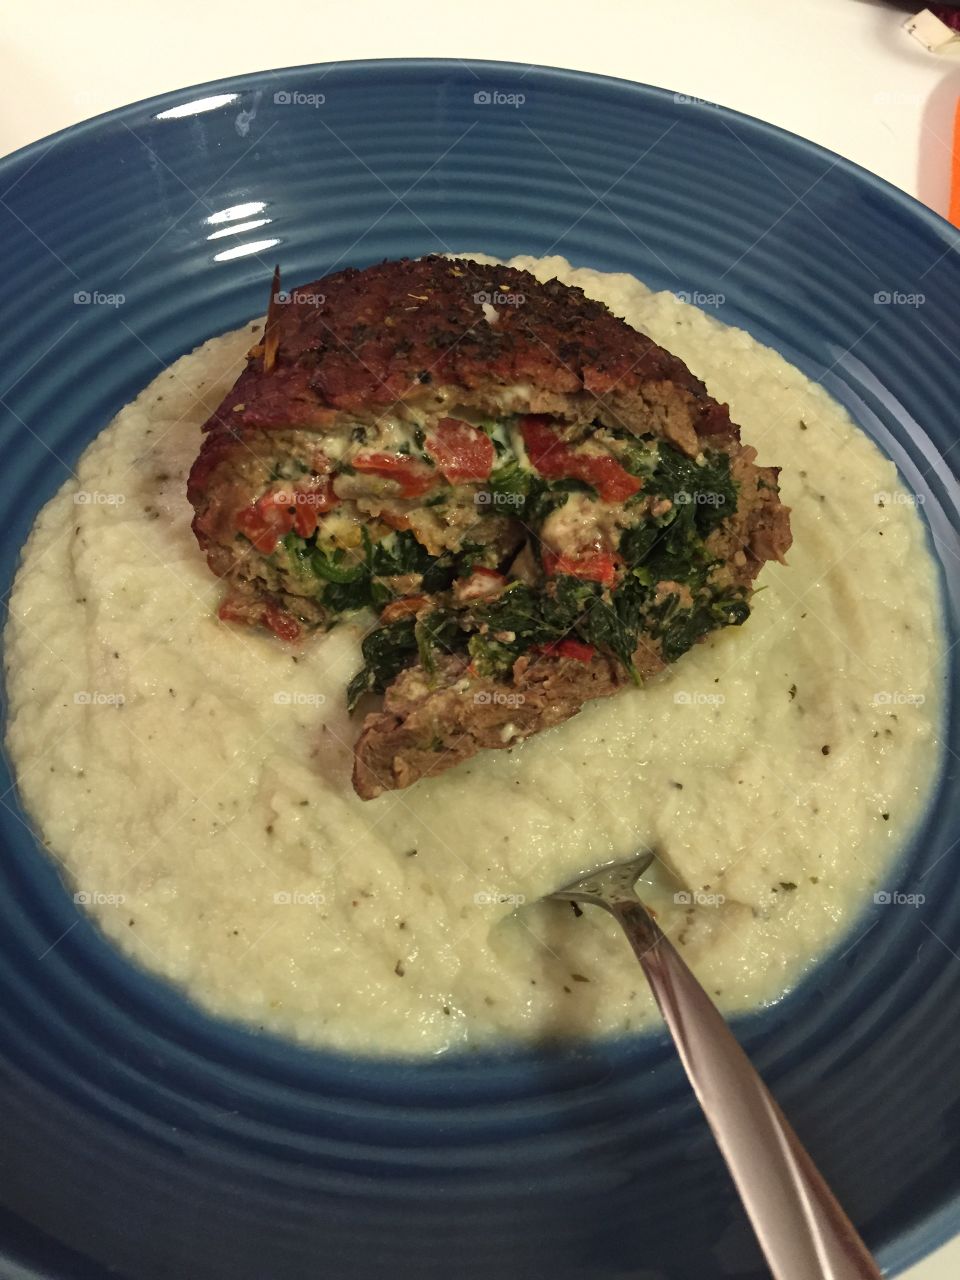 Steak roll me to heaven. Steak rolled with Gorgonzola cheese, roasted red peppers, and spinach served over mashed cauliflower 